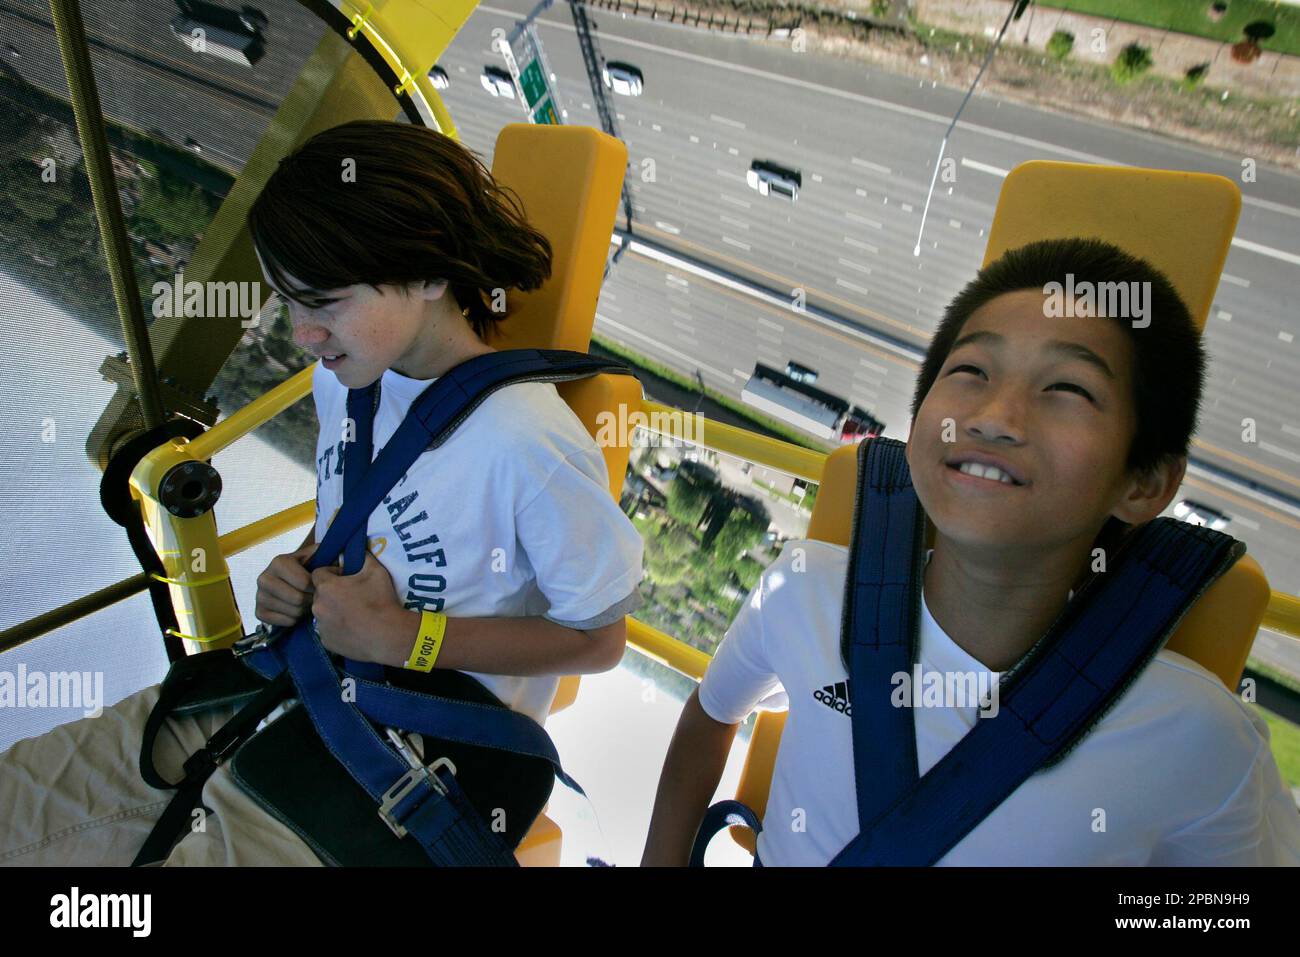 https://c8.alamy.com/comp/2PBN9H9/nick-modar-11-left-and-liam-olson-kenny-12-right-go-inverted-while-riding-the-screamer-at-the-scandia-family-fun-center-in-sacramento-calif-friday-april-6-2007-the-165-foot-tall-windmill-ride-has-caused-some-neighbors-to-complain-about-the-screams-of-its-riders-forcing-the-park-to-institute-a-policy-of-complete-silence-ap-photorich-pedroncelli-2PBN9H9.jpg